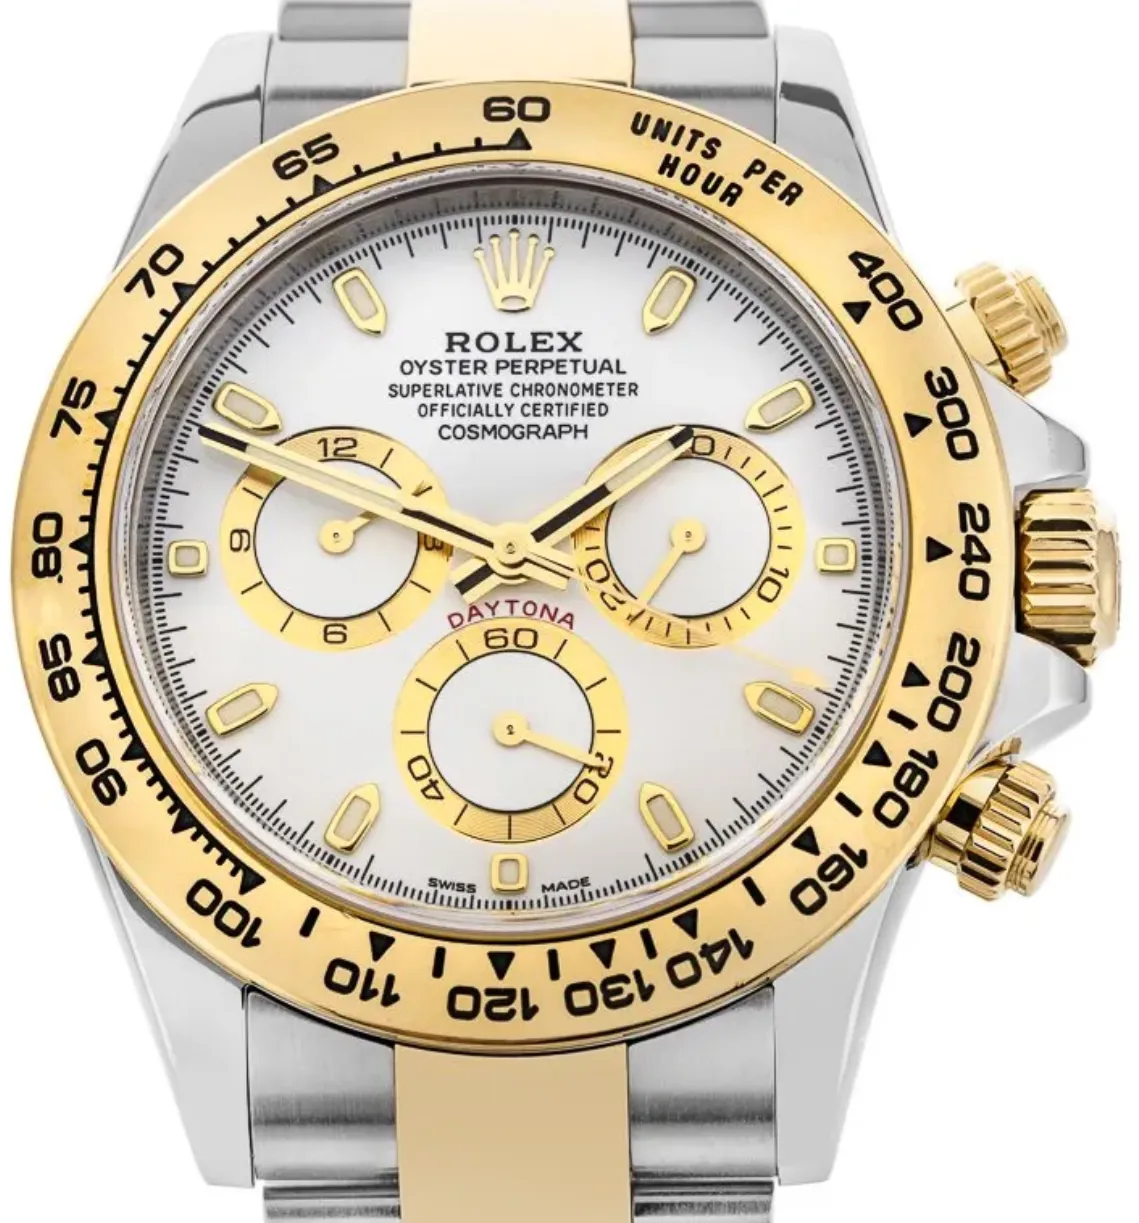 Rolex Daytona 116503 40mm Stainless steel and yellow gold White